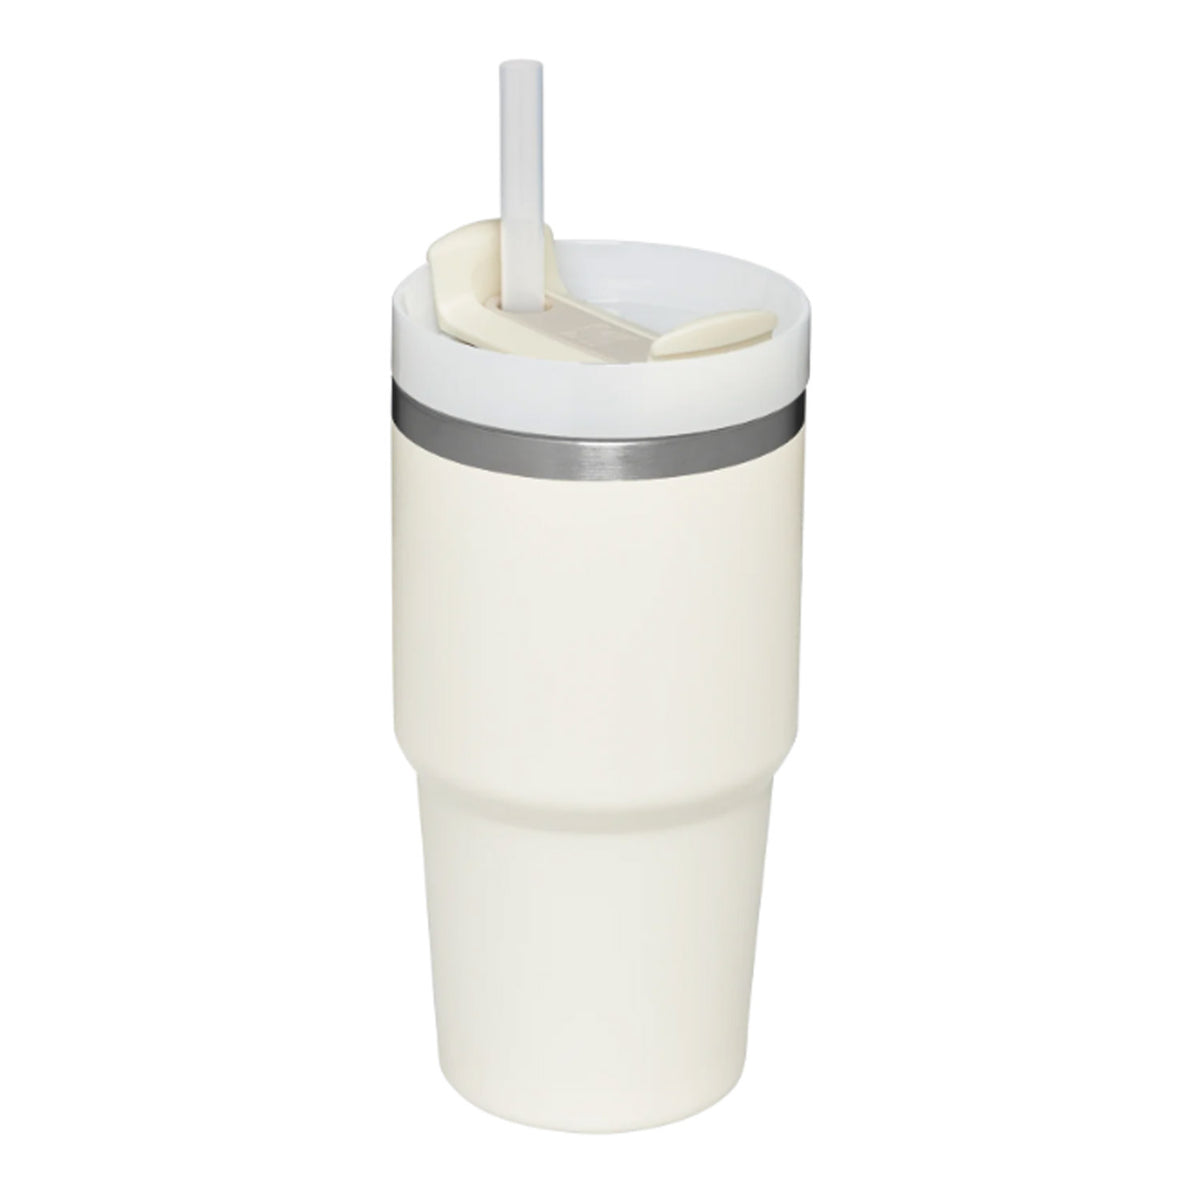 Stanley The Quencher H2.0 FlowState™ 20oz Tumbler